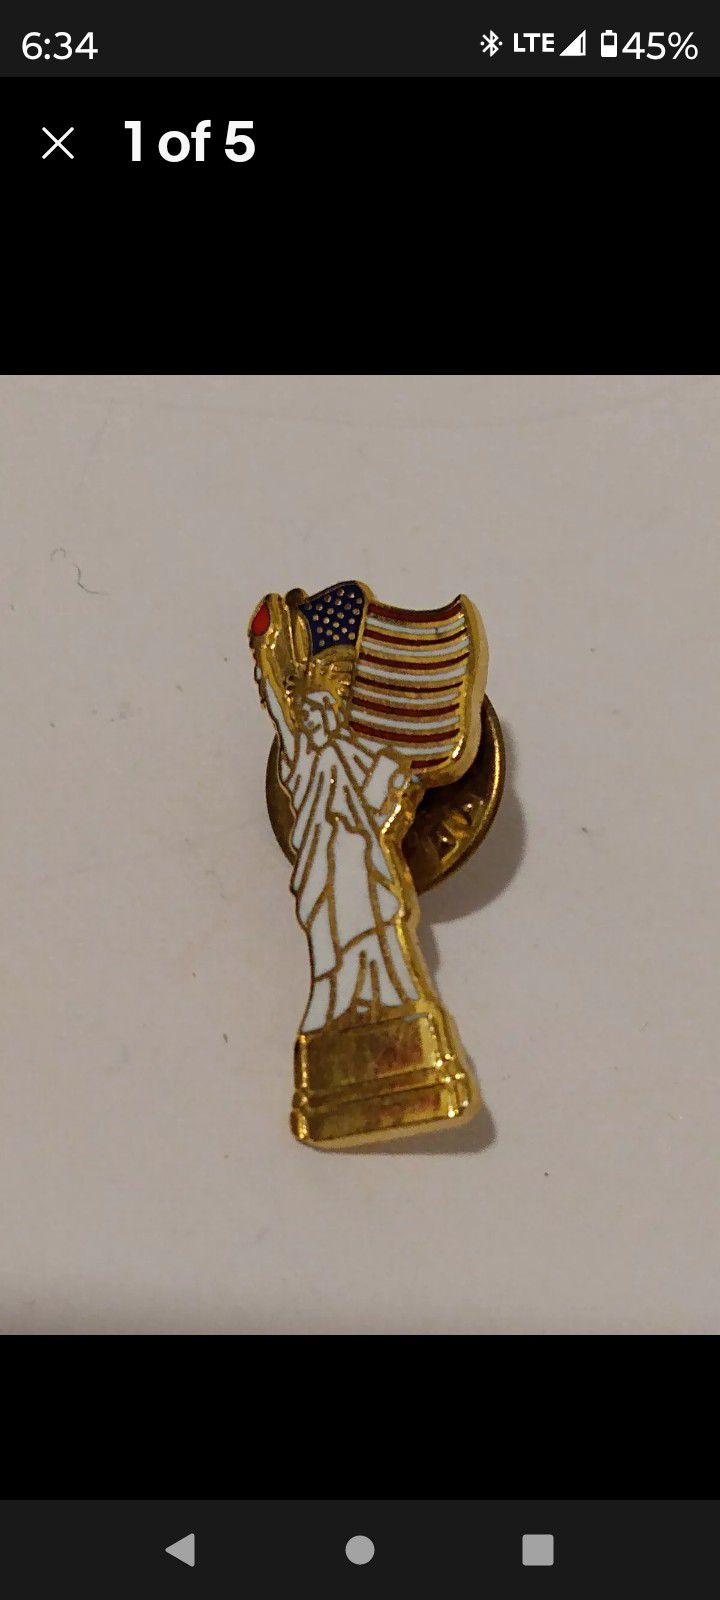 Pre-owned Statue of Liberty Figure American Flag Lapel Pin